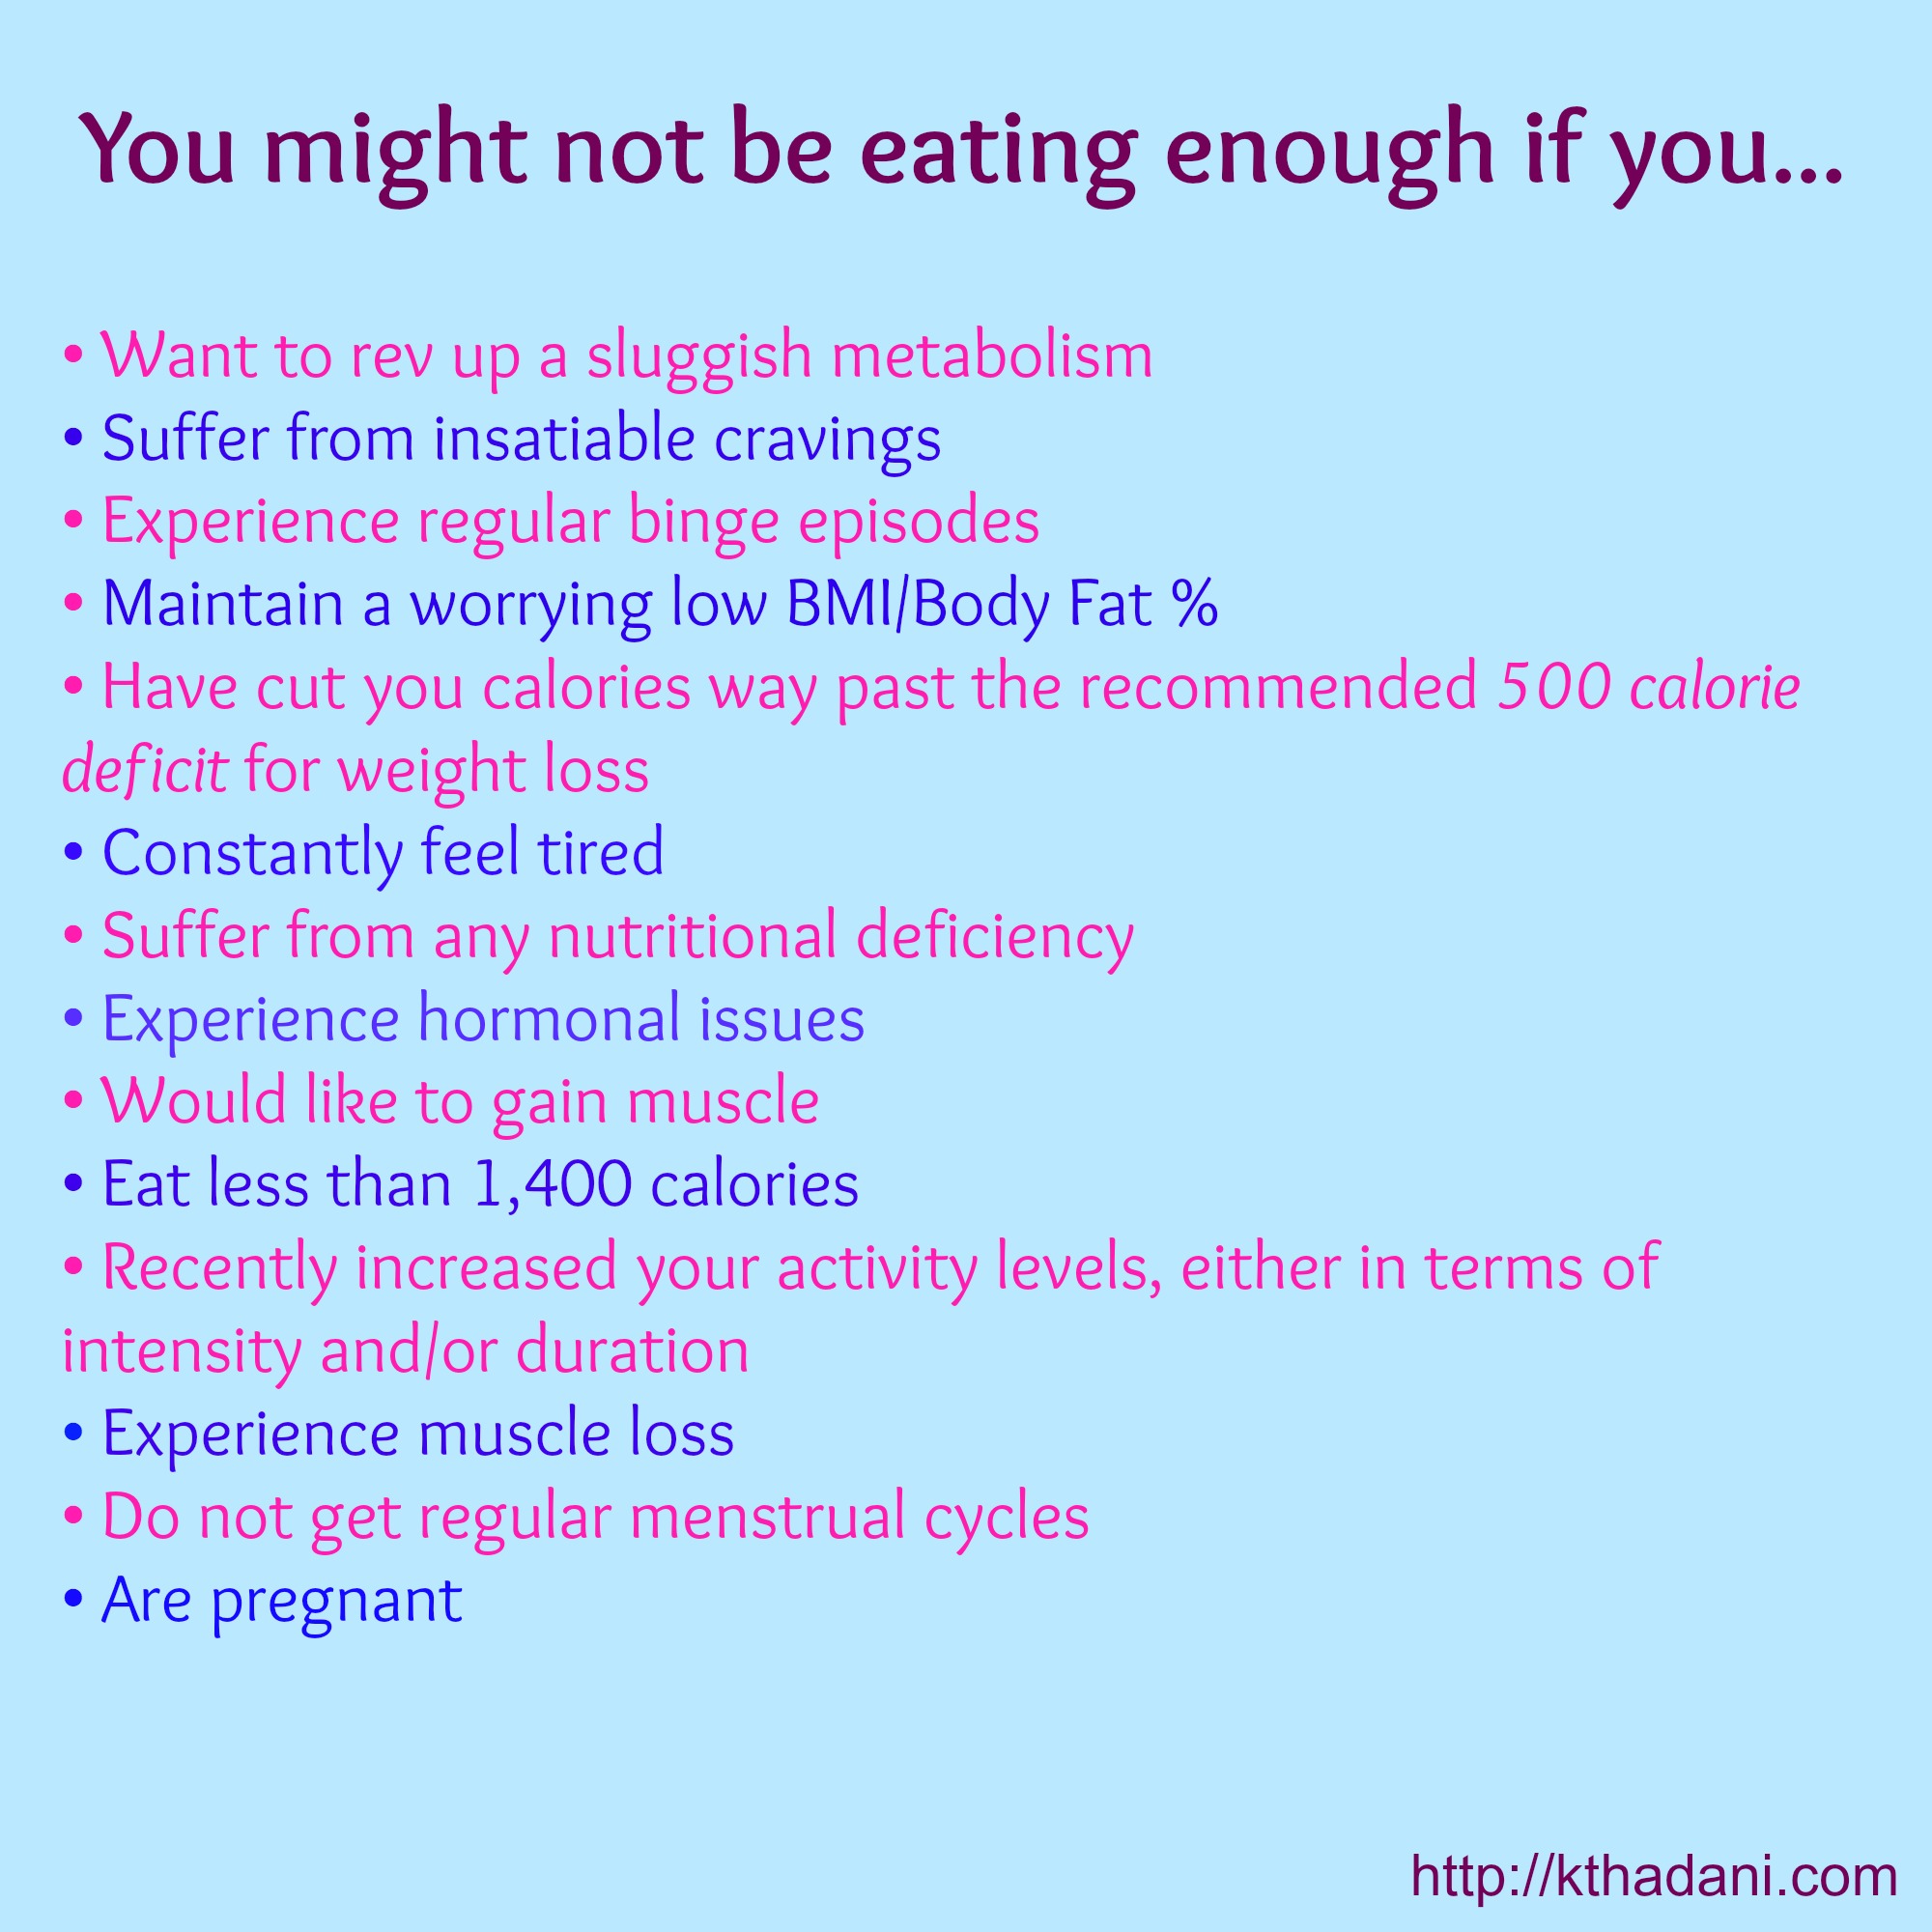 You might not be eating enough if you...